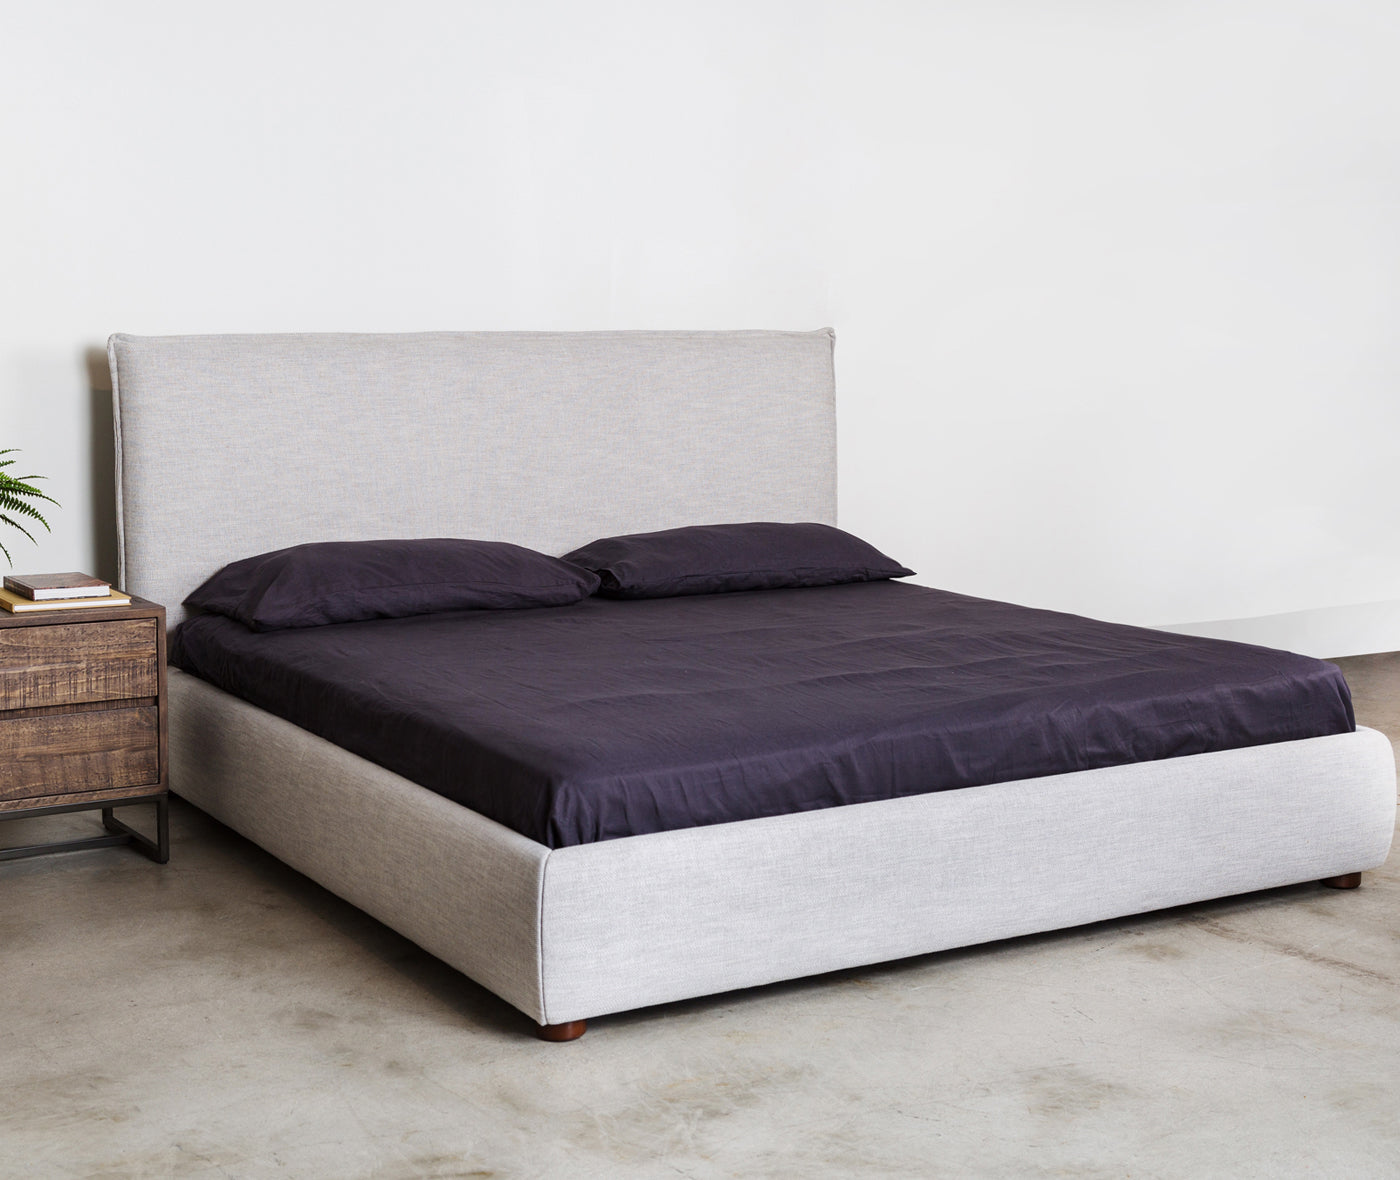 Luzon Bed - More Options